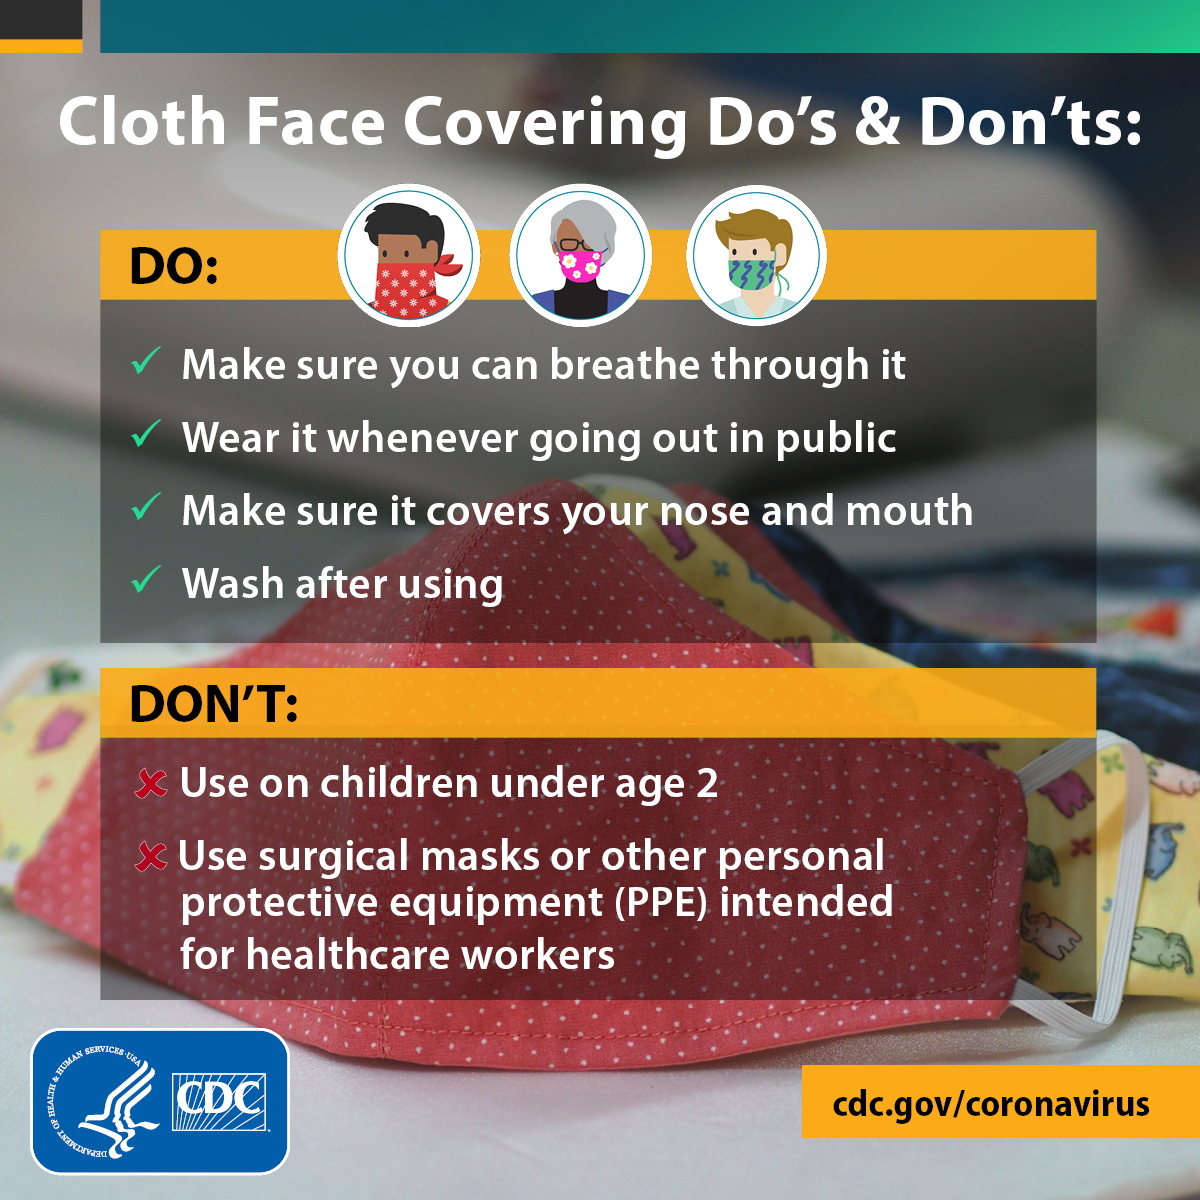 CDC recommends that everyone wear a face mask while out in public